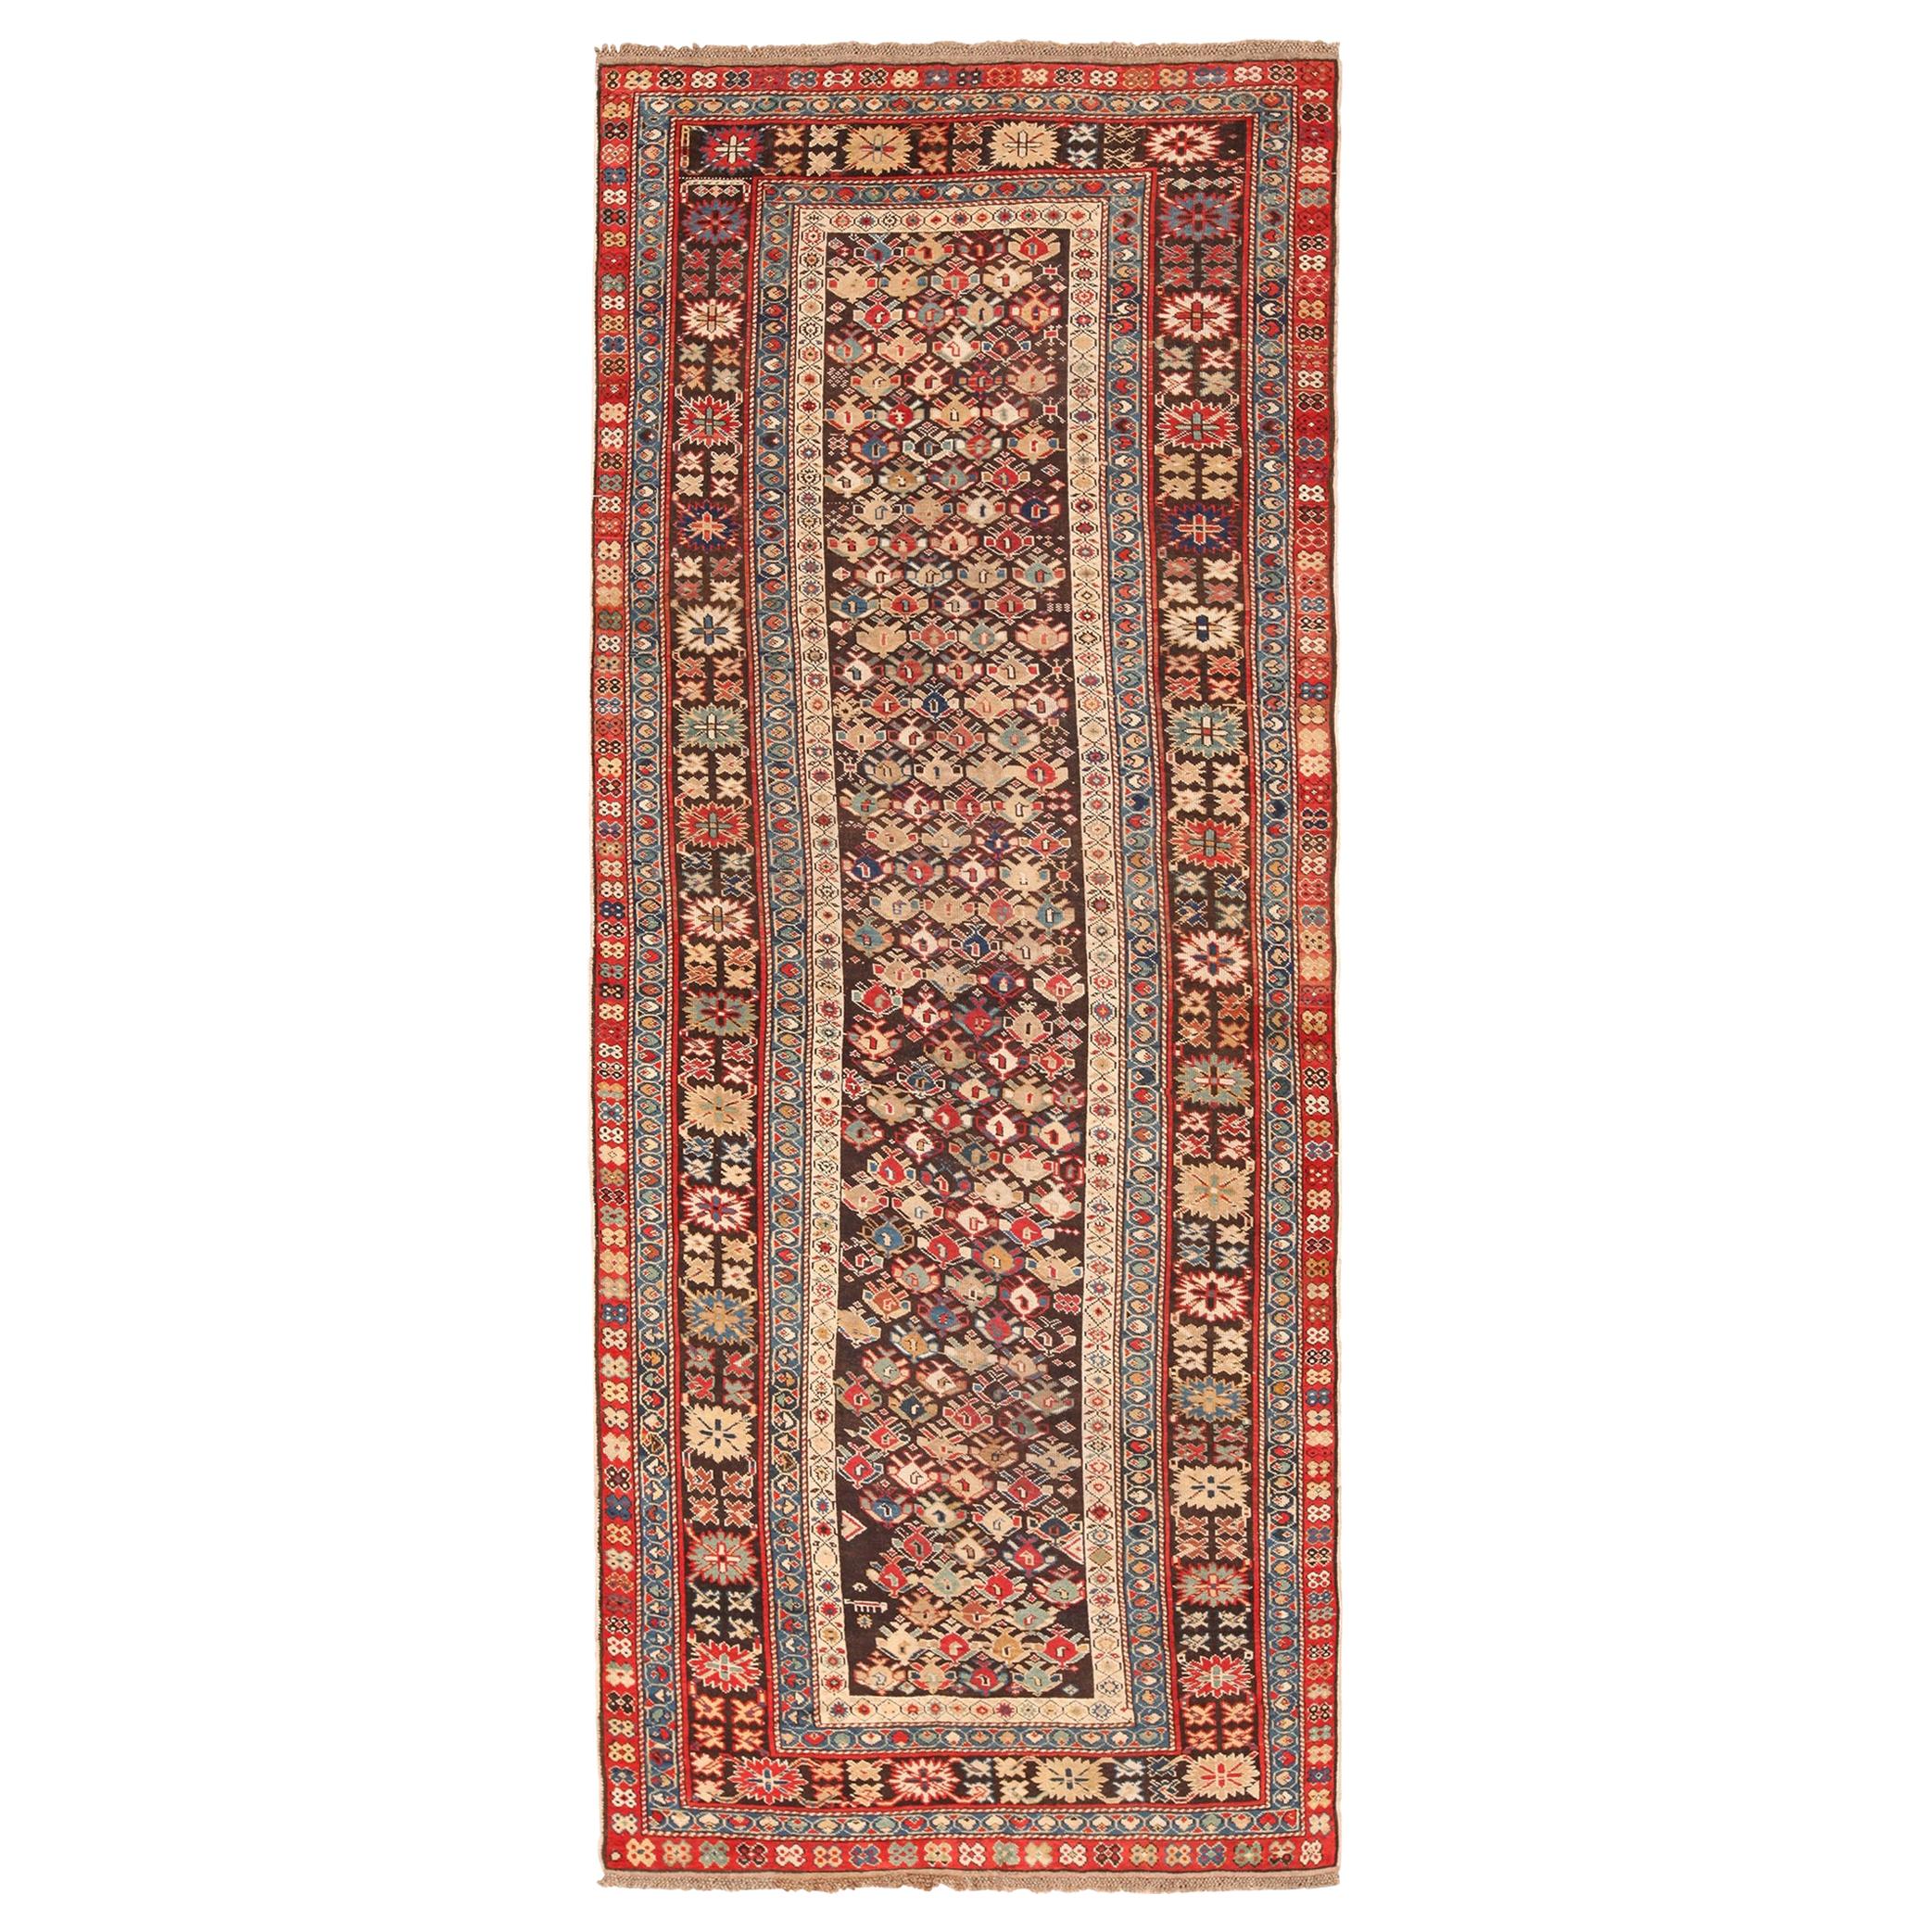 Nazmiyal Collection Antique Tribal Caucasian Kuba Rug. Size: 4 ft x 10 ft 2 in